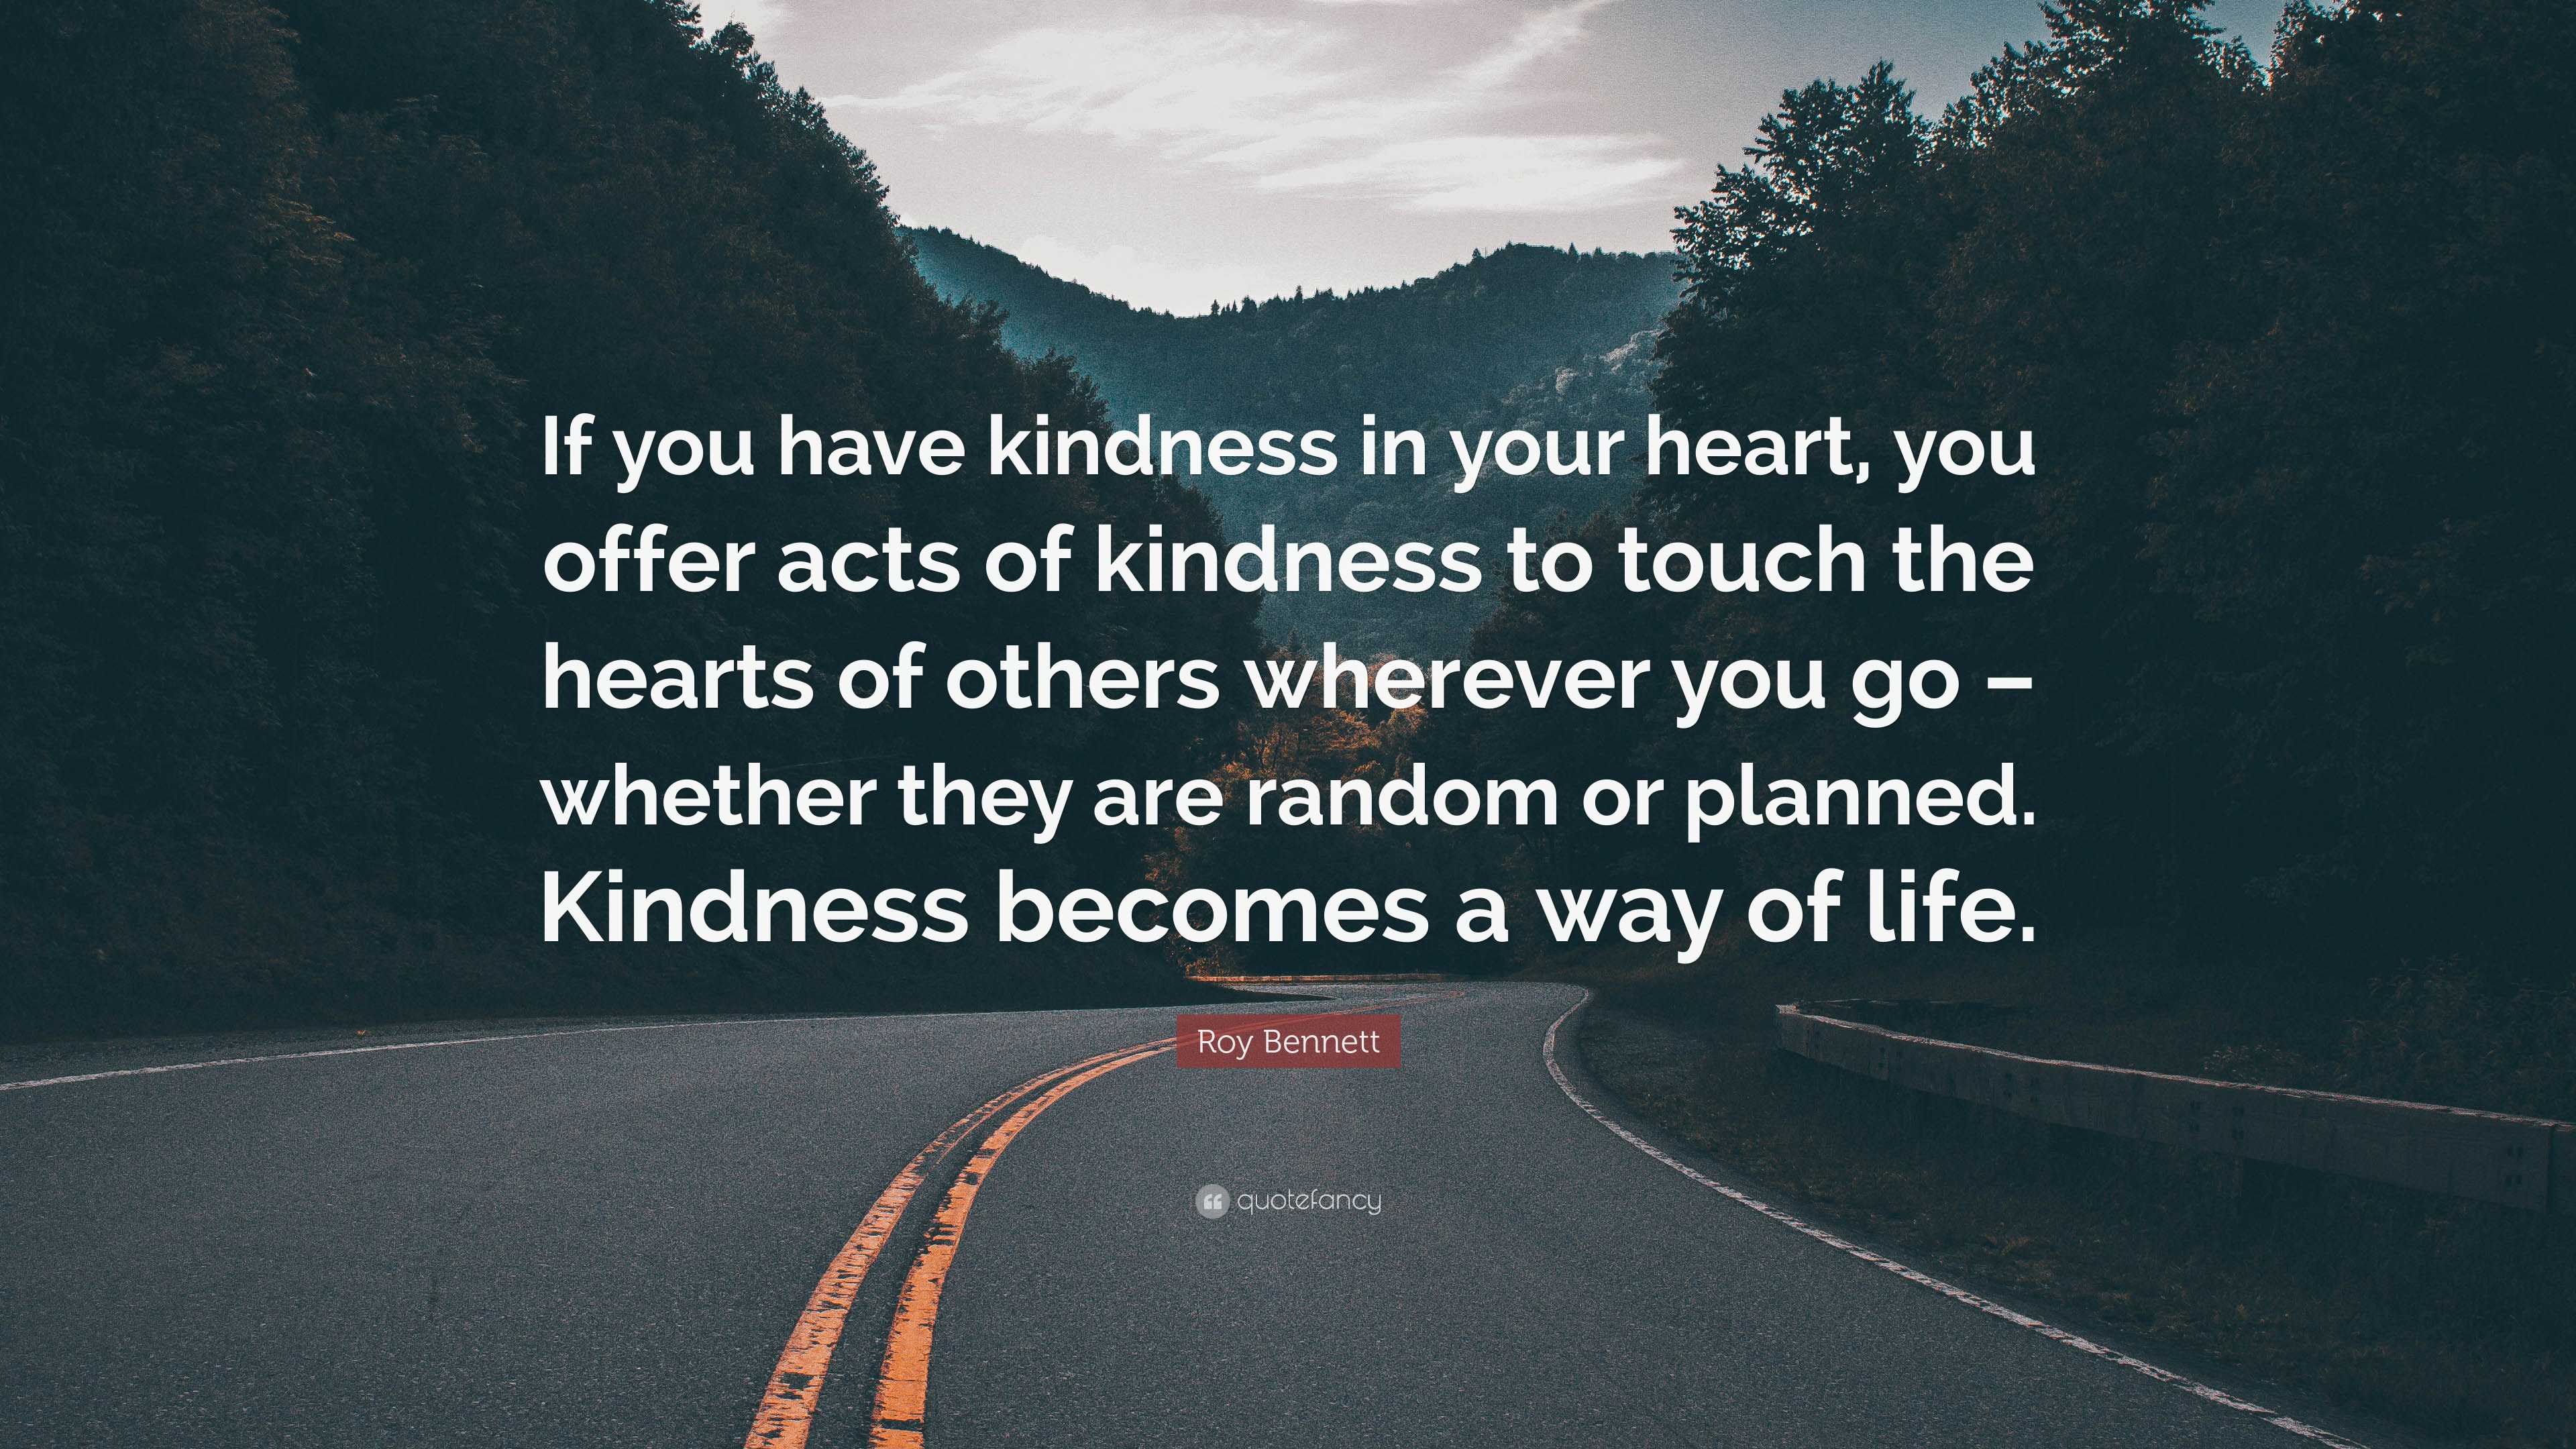 Roy Bennett Quote: “If you have kindness in your heart, you offer